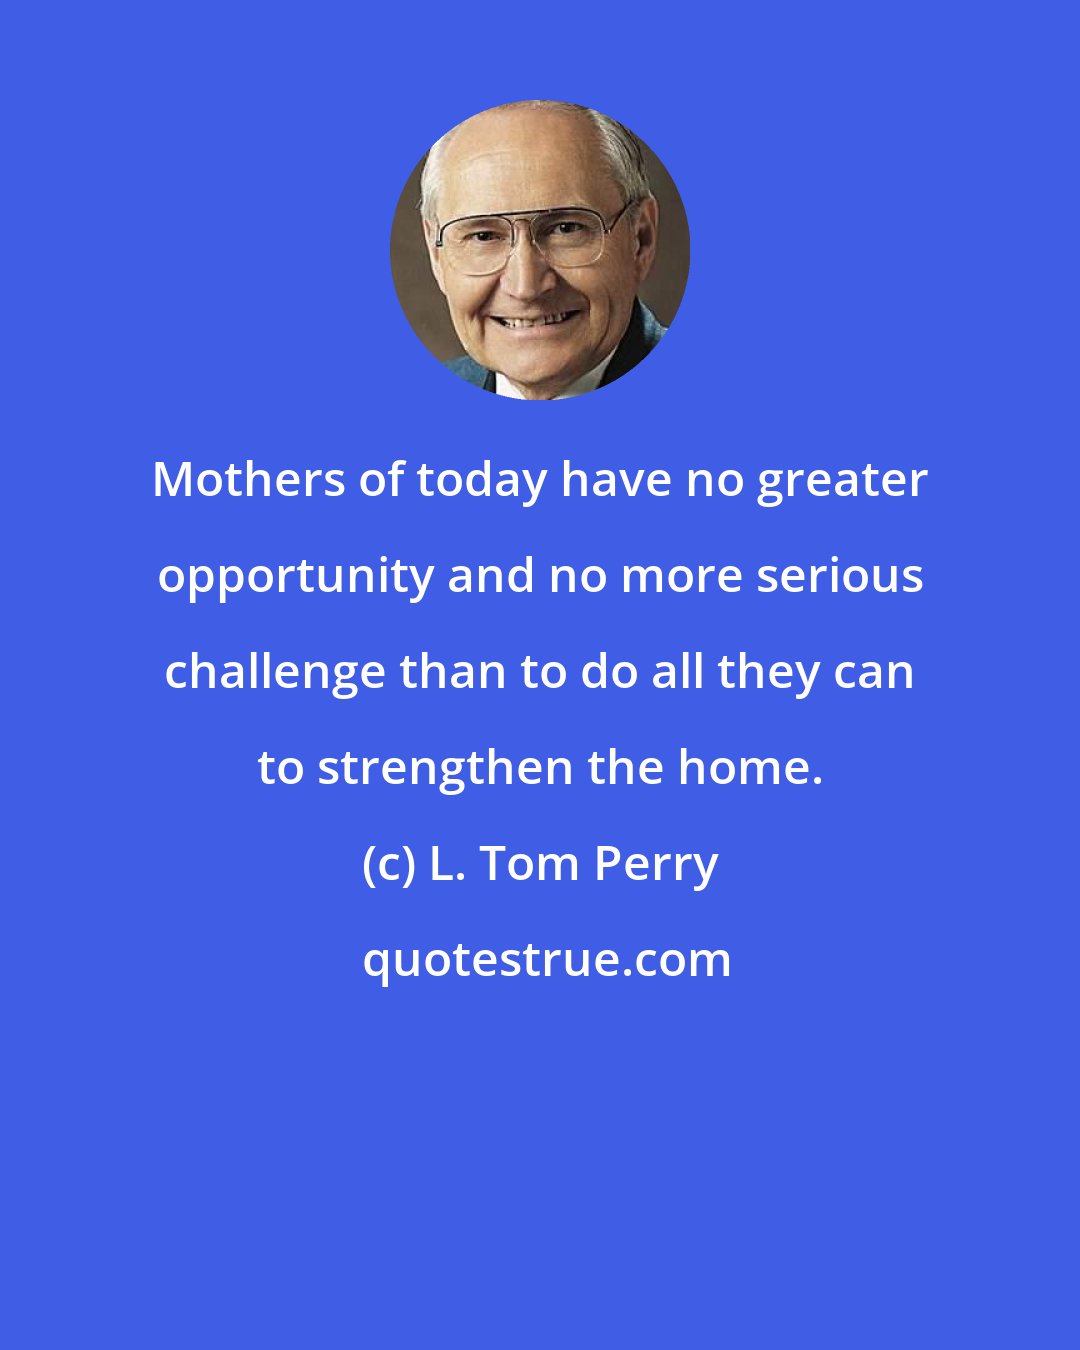 L. Tom Perry: Mothers of today have no greater opportunity and no more serious challenge than to do all they can to strengthen the home.